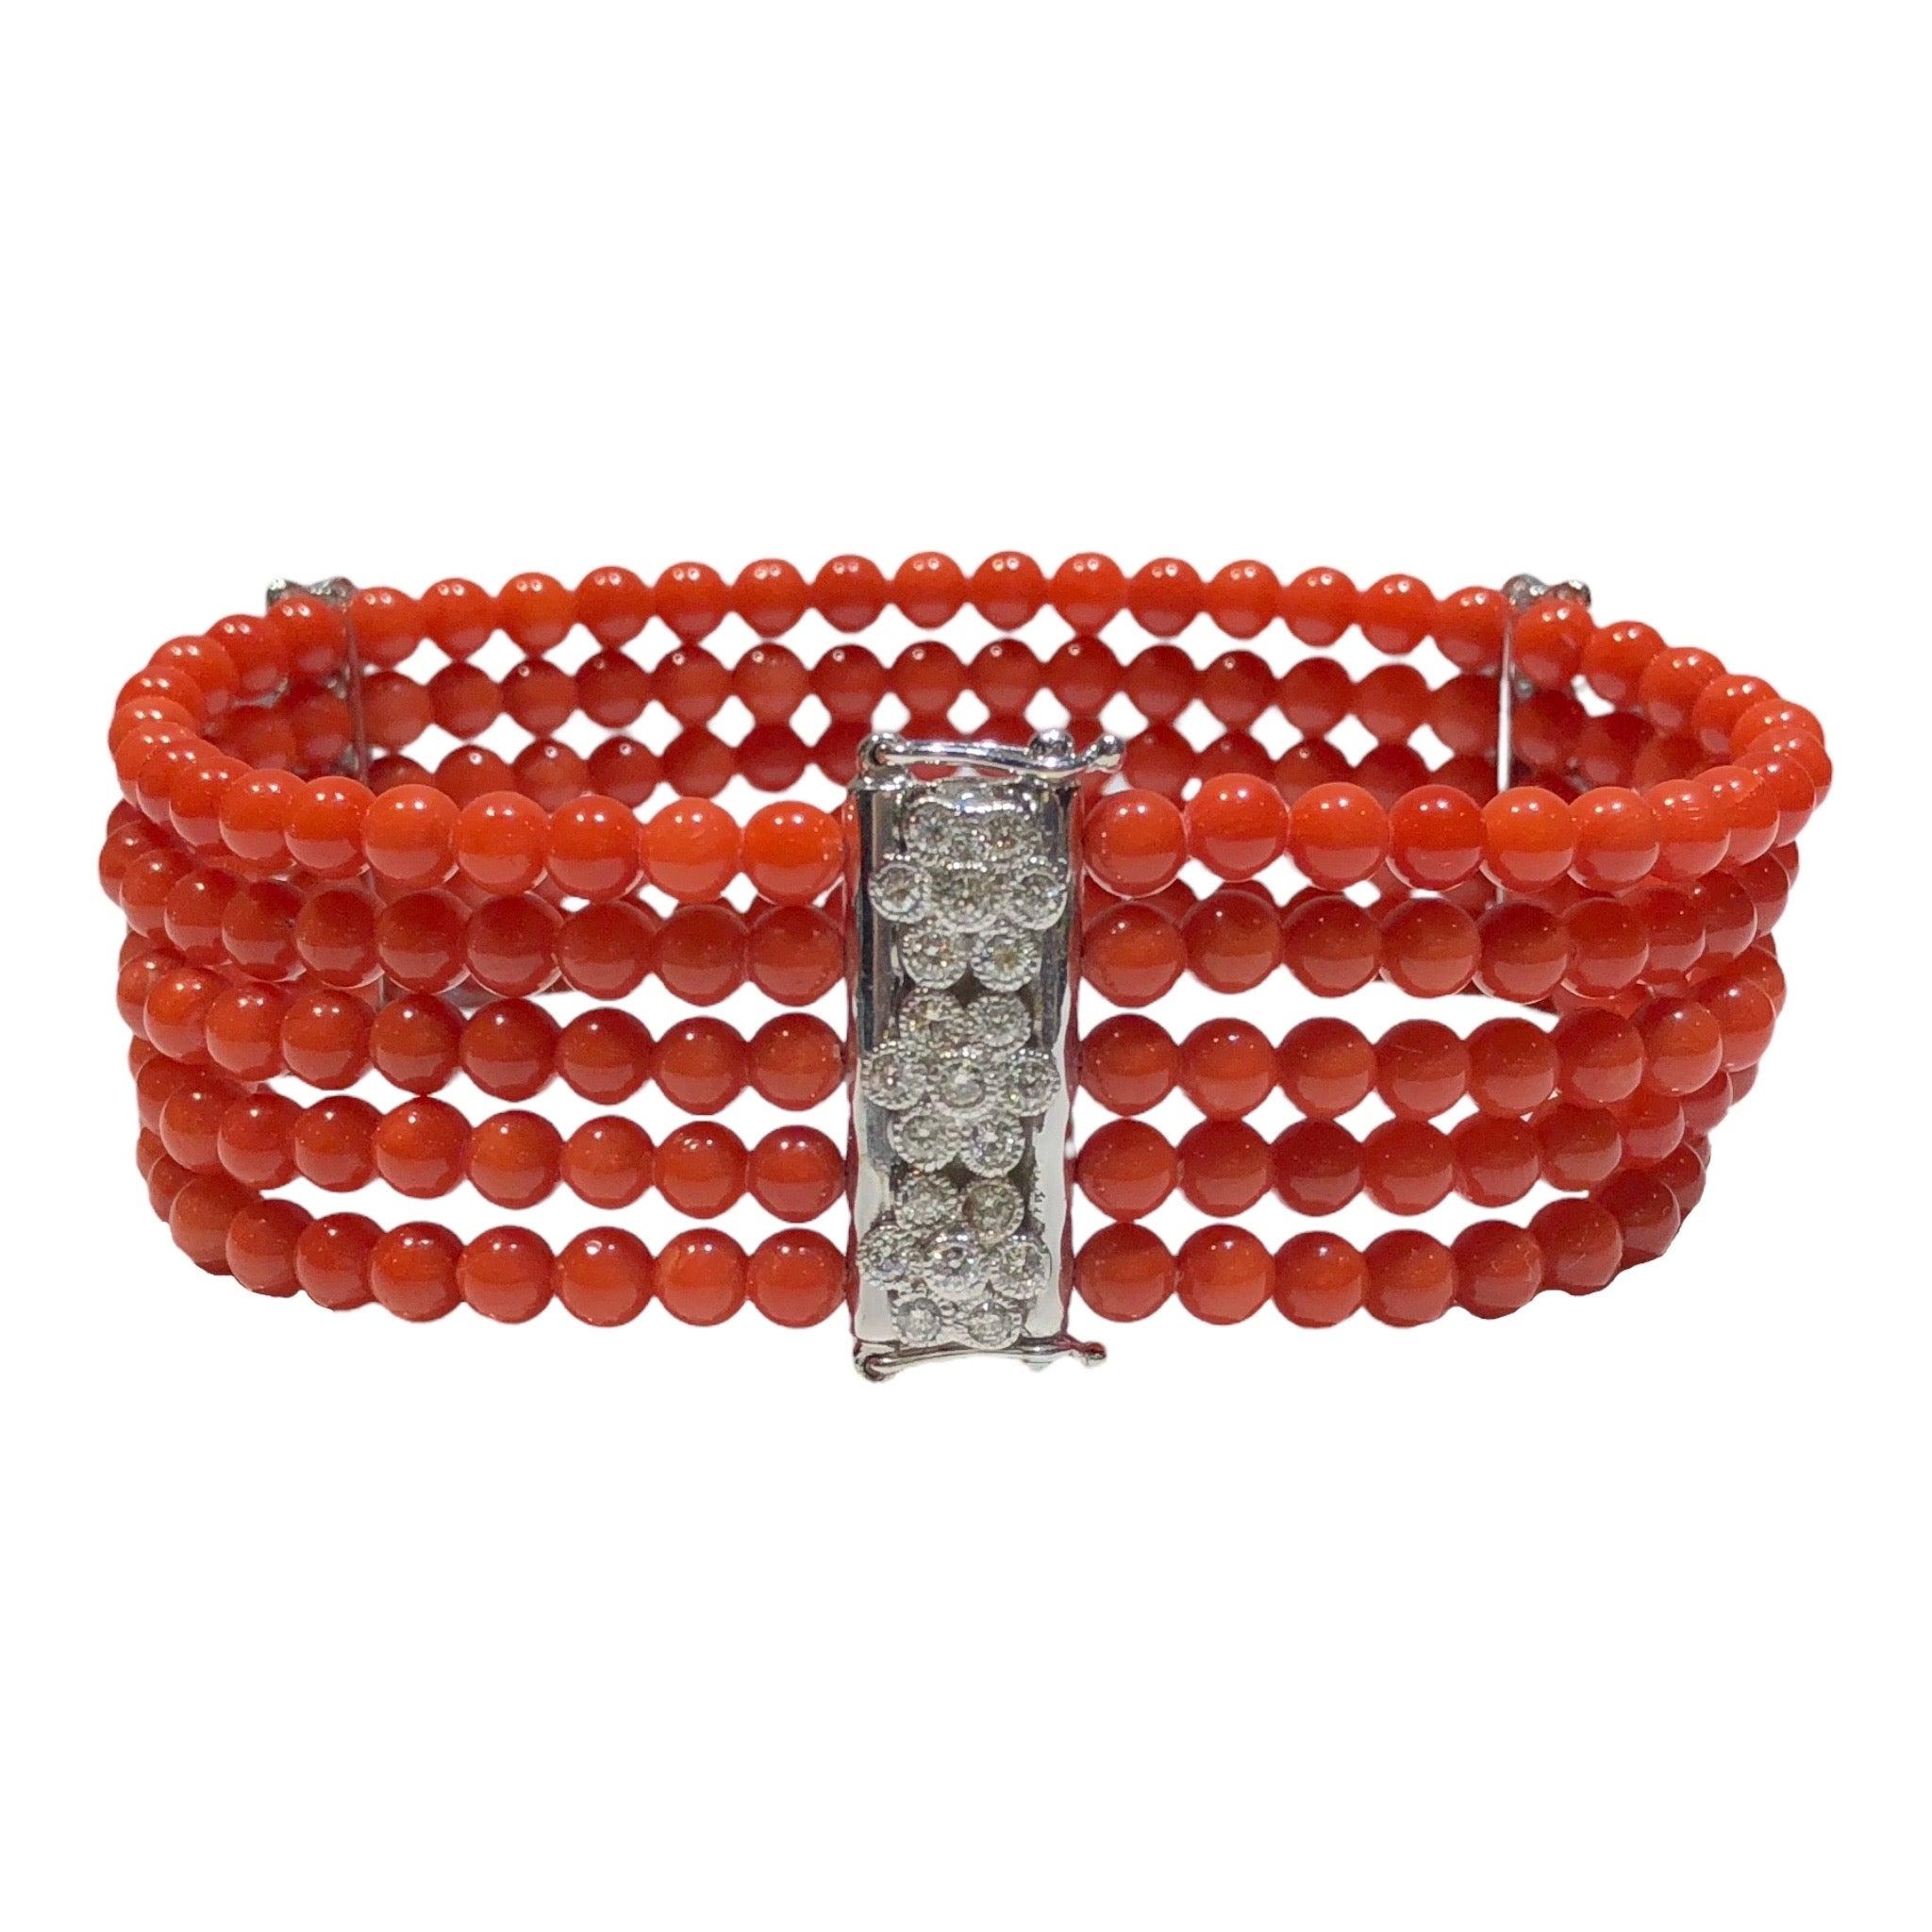 The bracelet features a five-strand design of 4 mm round natural coral beads with 18K white gold diamond florets spacers and clasp. Slide clasp with double safety. 
63 round brilliant cut diamonds: 1.30ctw. Color: G-H, Clarity: